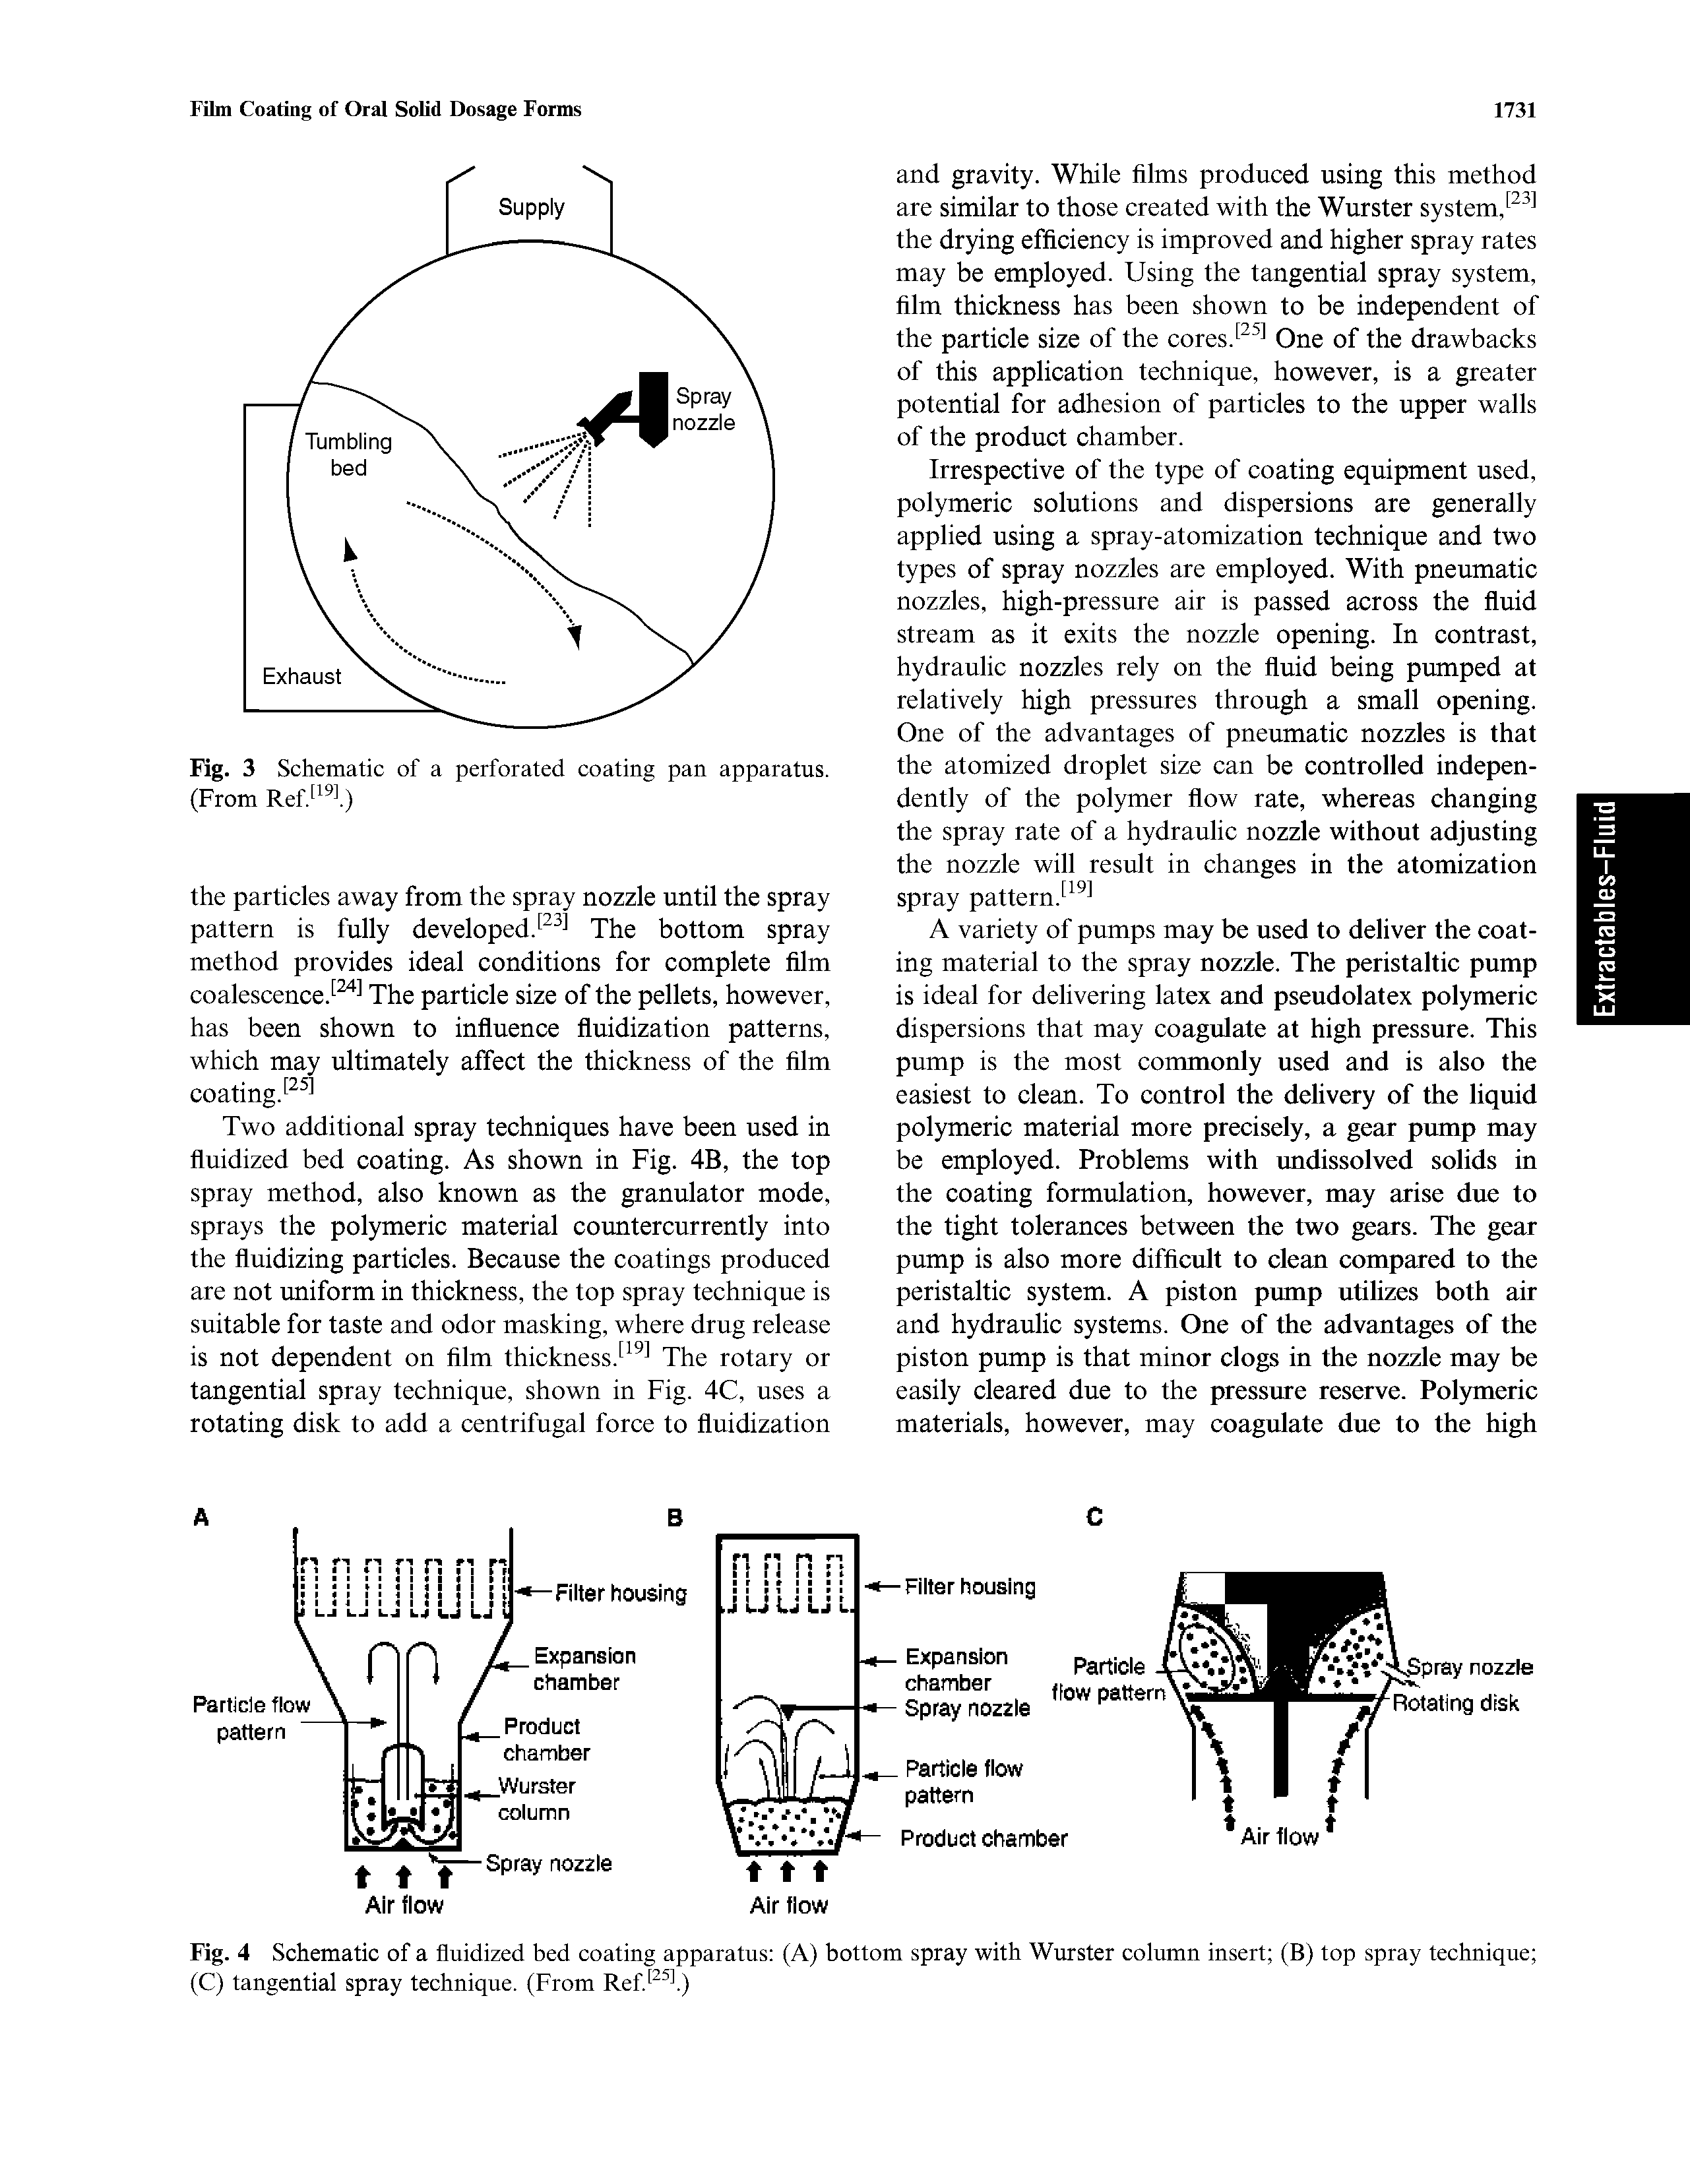 Fig. 4 Schematic of a fluidized bed coating apparatus (A) bottom spray with Wurster column insert (B) top spray technique (C) tangential spray technique. (From Ref...